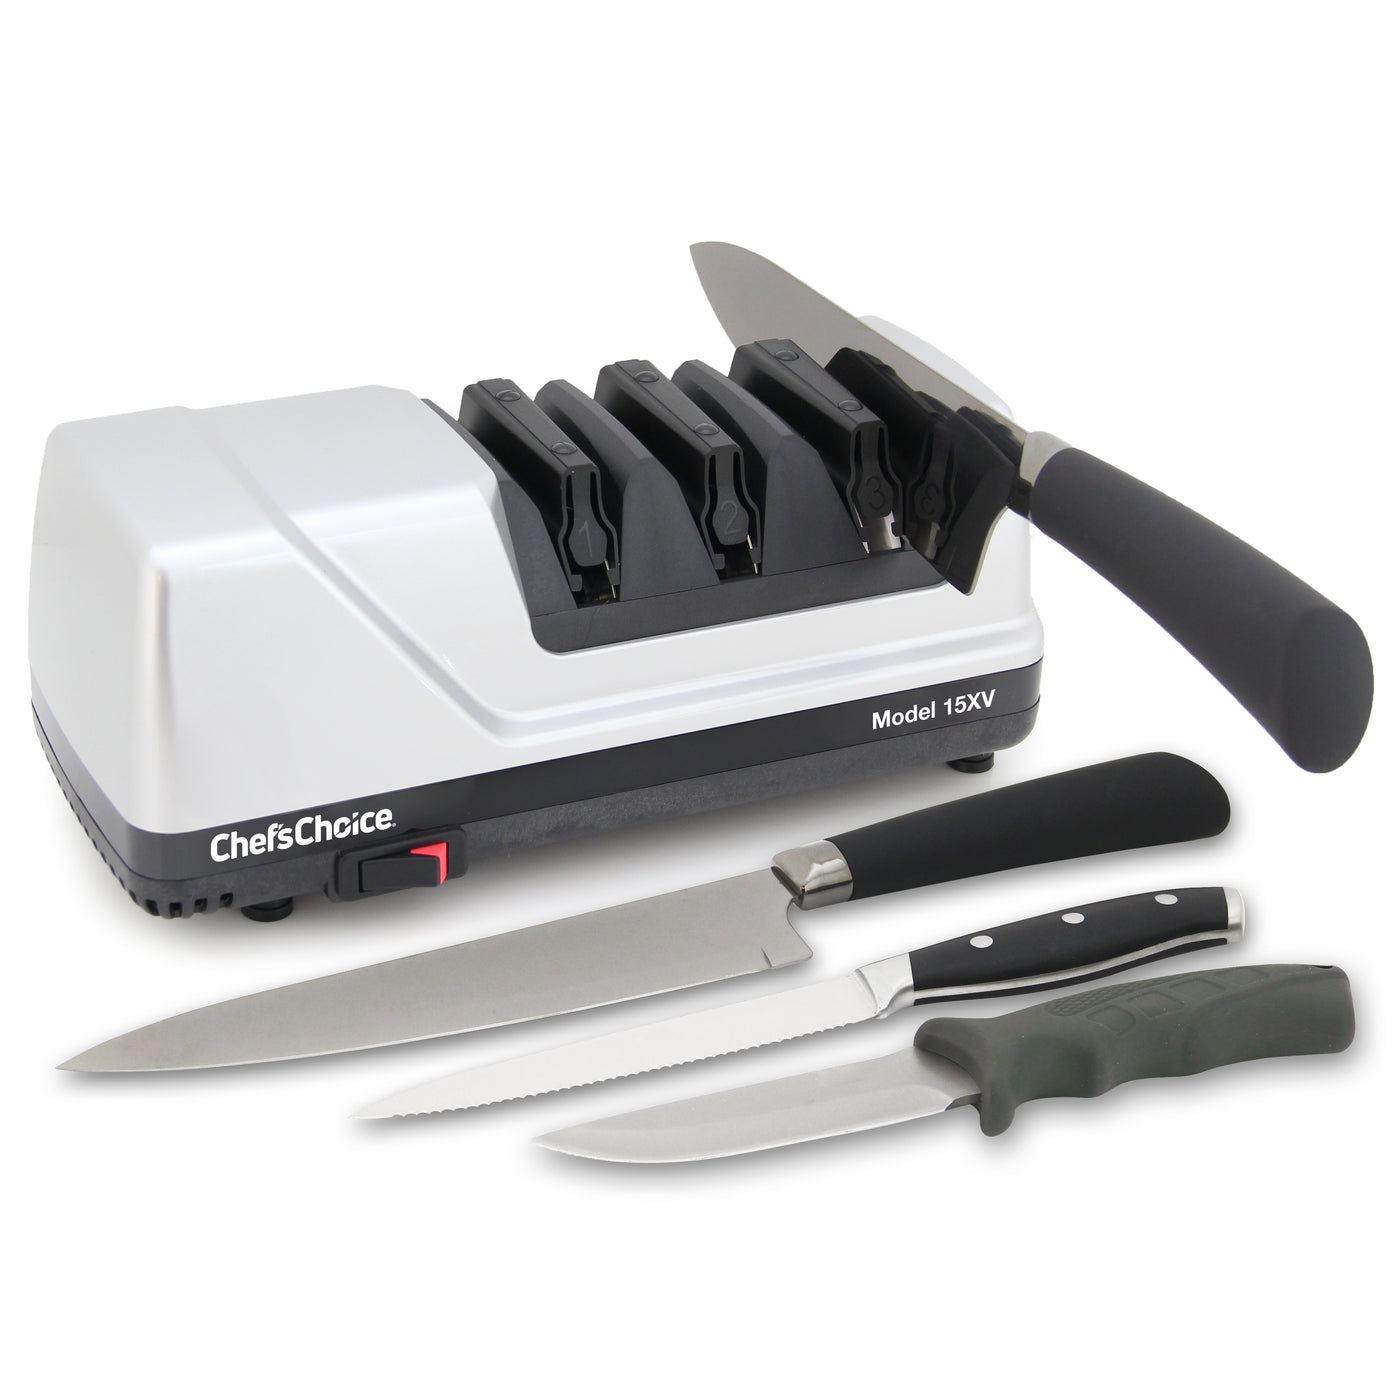 How to Pick the Best Knife Sharpener for Serrated Knives